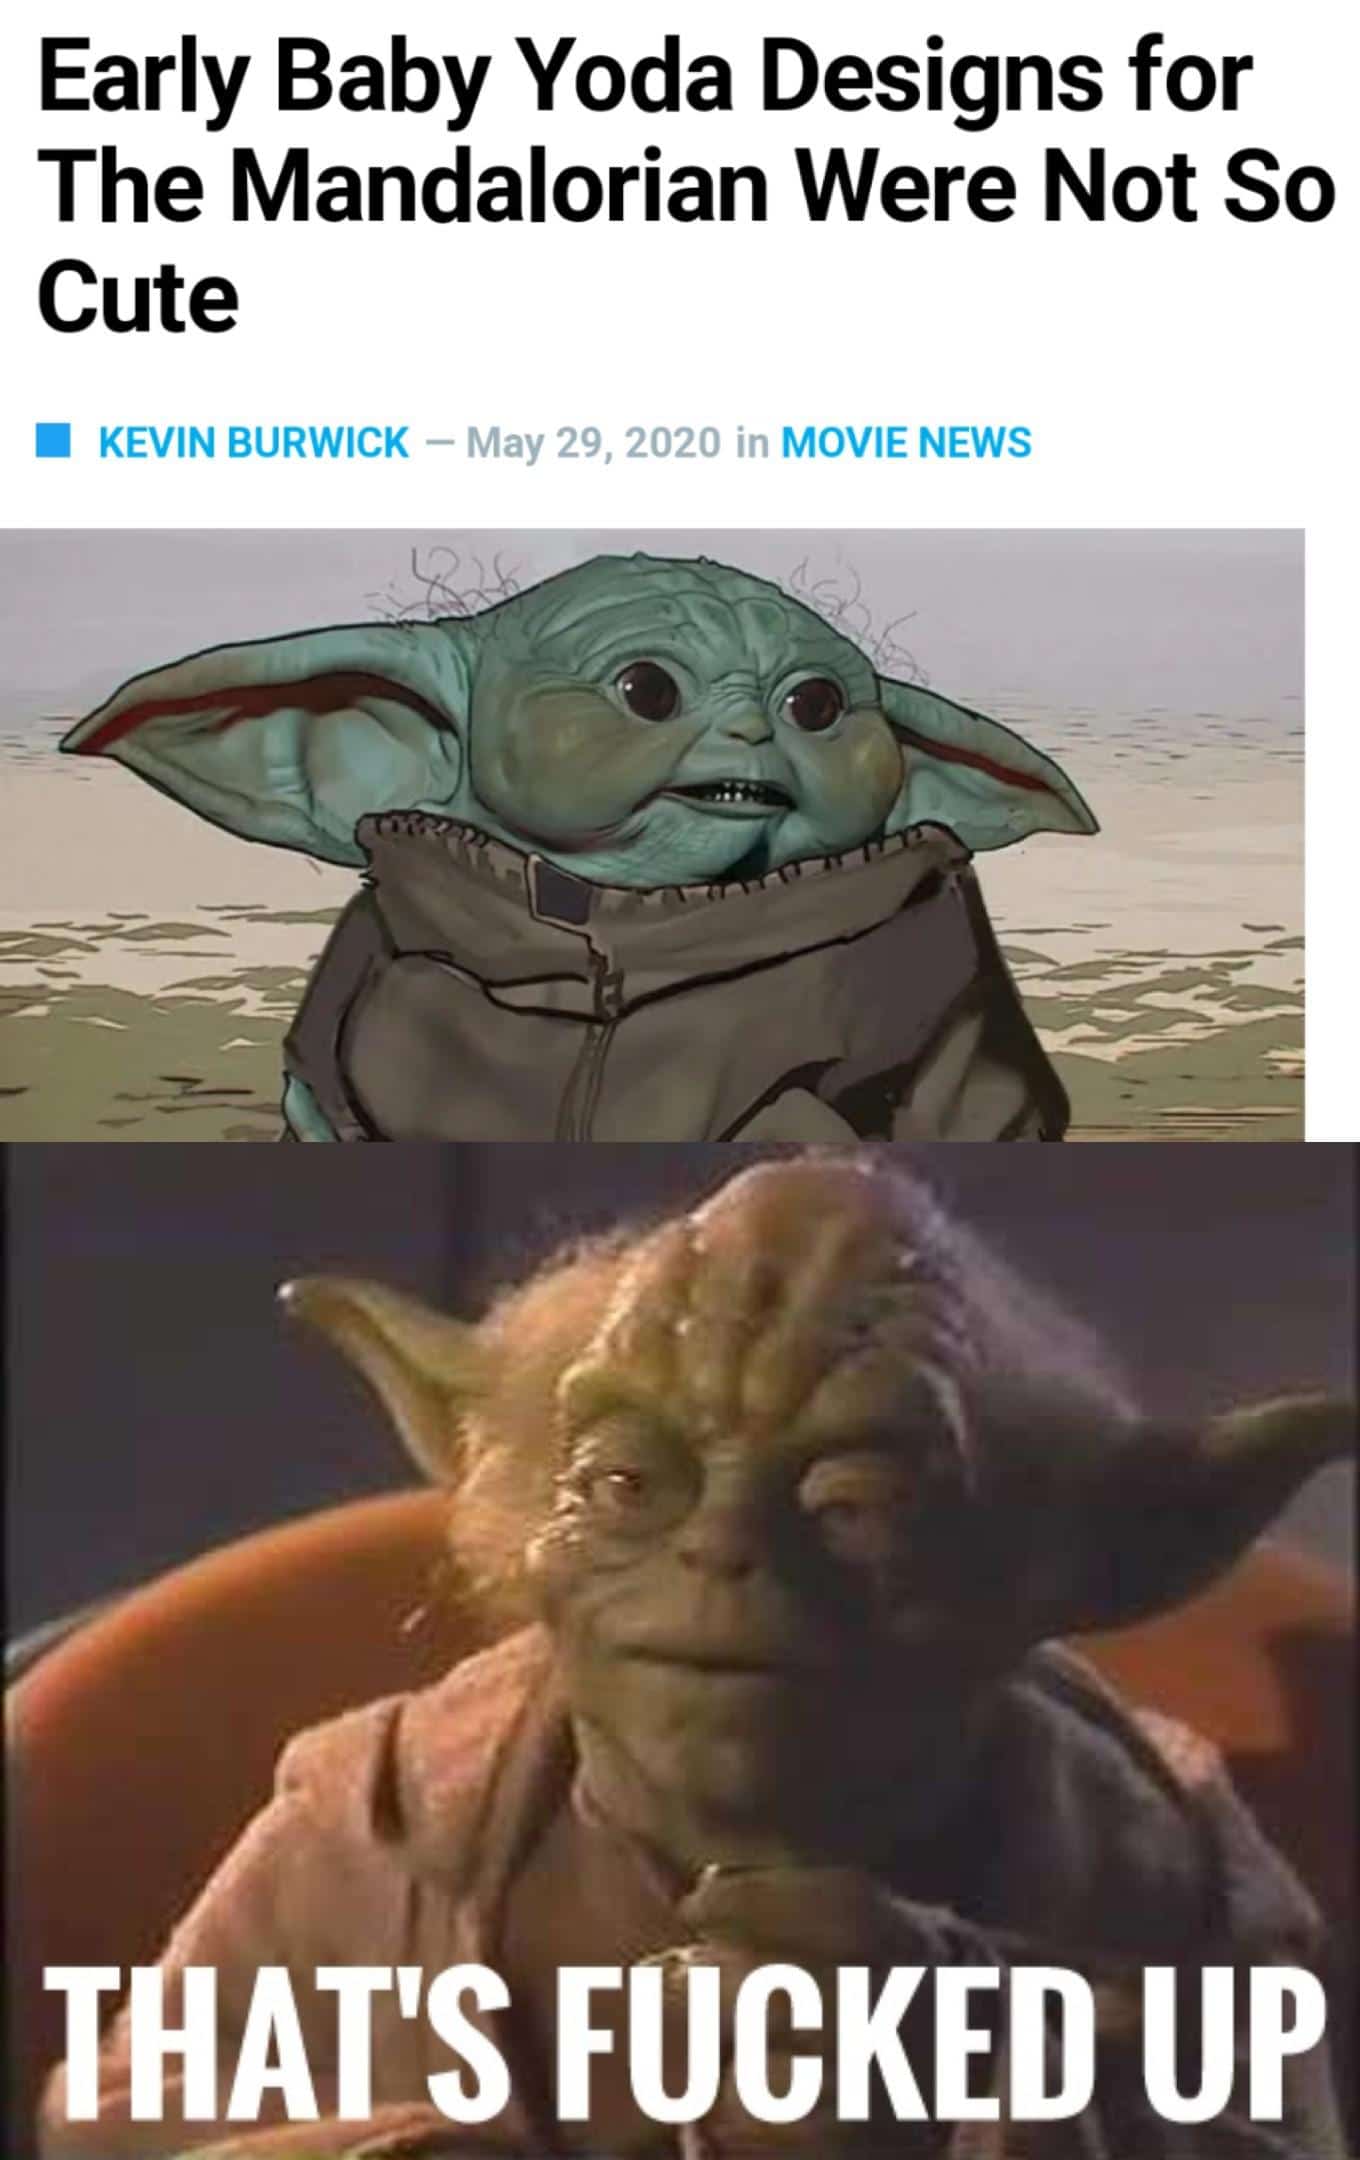 Sequel-memes, Fucked, Star Wars, Baby Yoda, Yoda, Danny DeVito Star Wars Memes Sequel-memes, Fucked, Star Wars, Baby Yoda, Yoda, Danny DeVito text: Early Baby Yoda Designs for The Mandalorian Were Not So Cute KEVIN BURWICK - May 29, 2020 in MOVIE NEWS T ATVS UP 